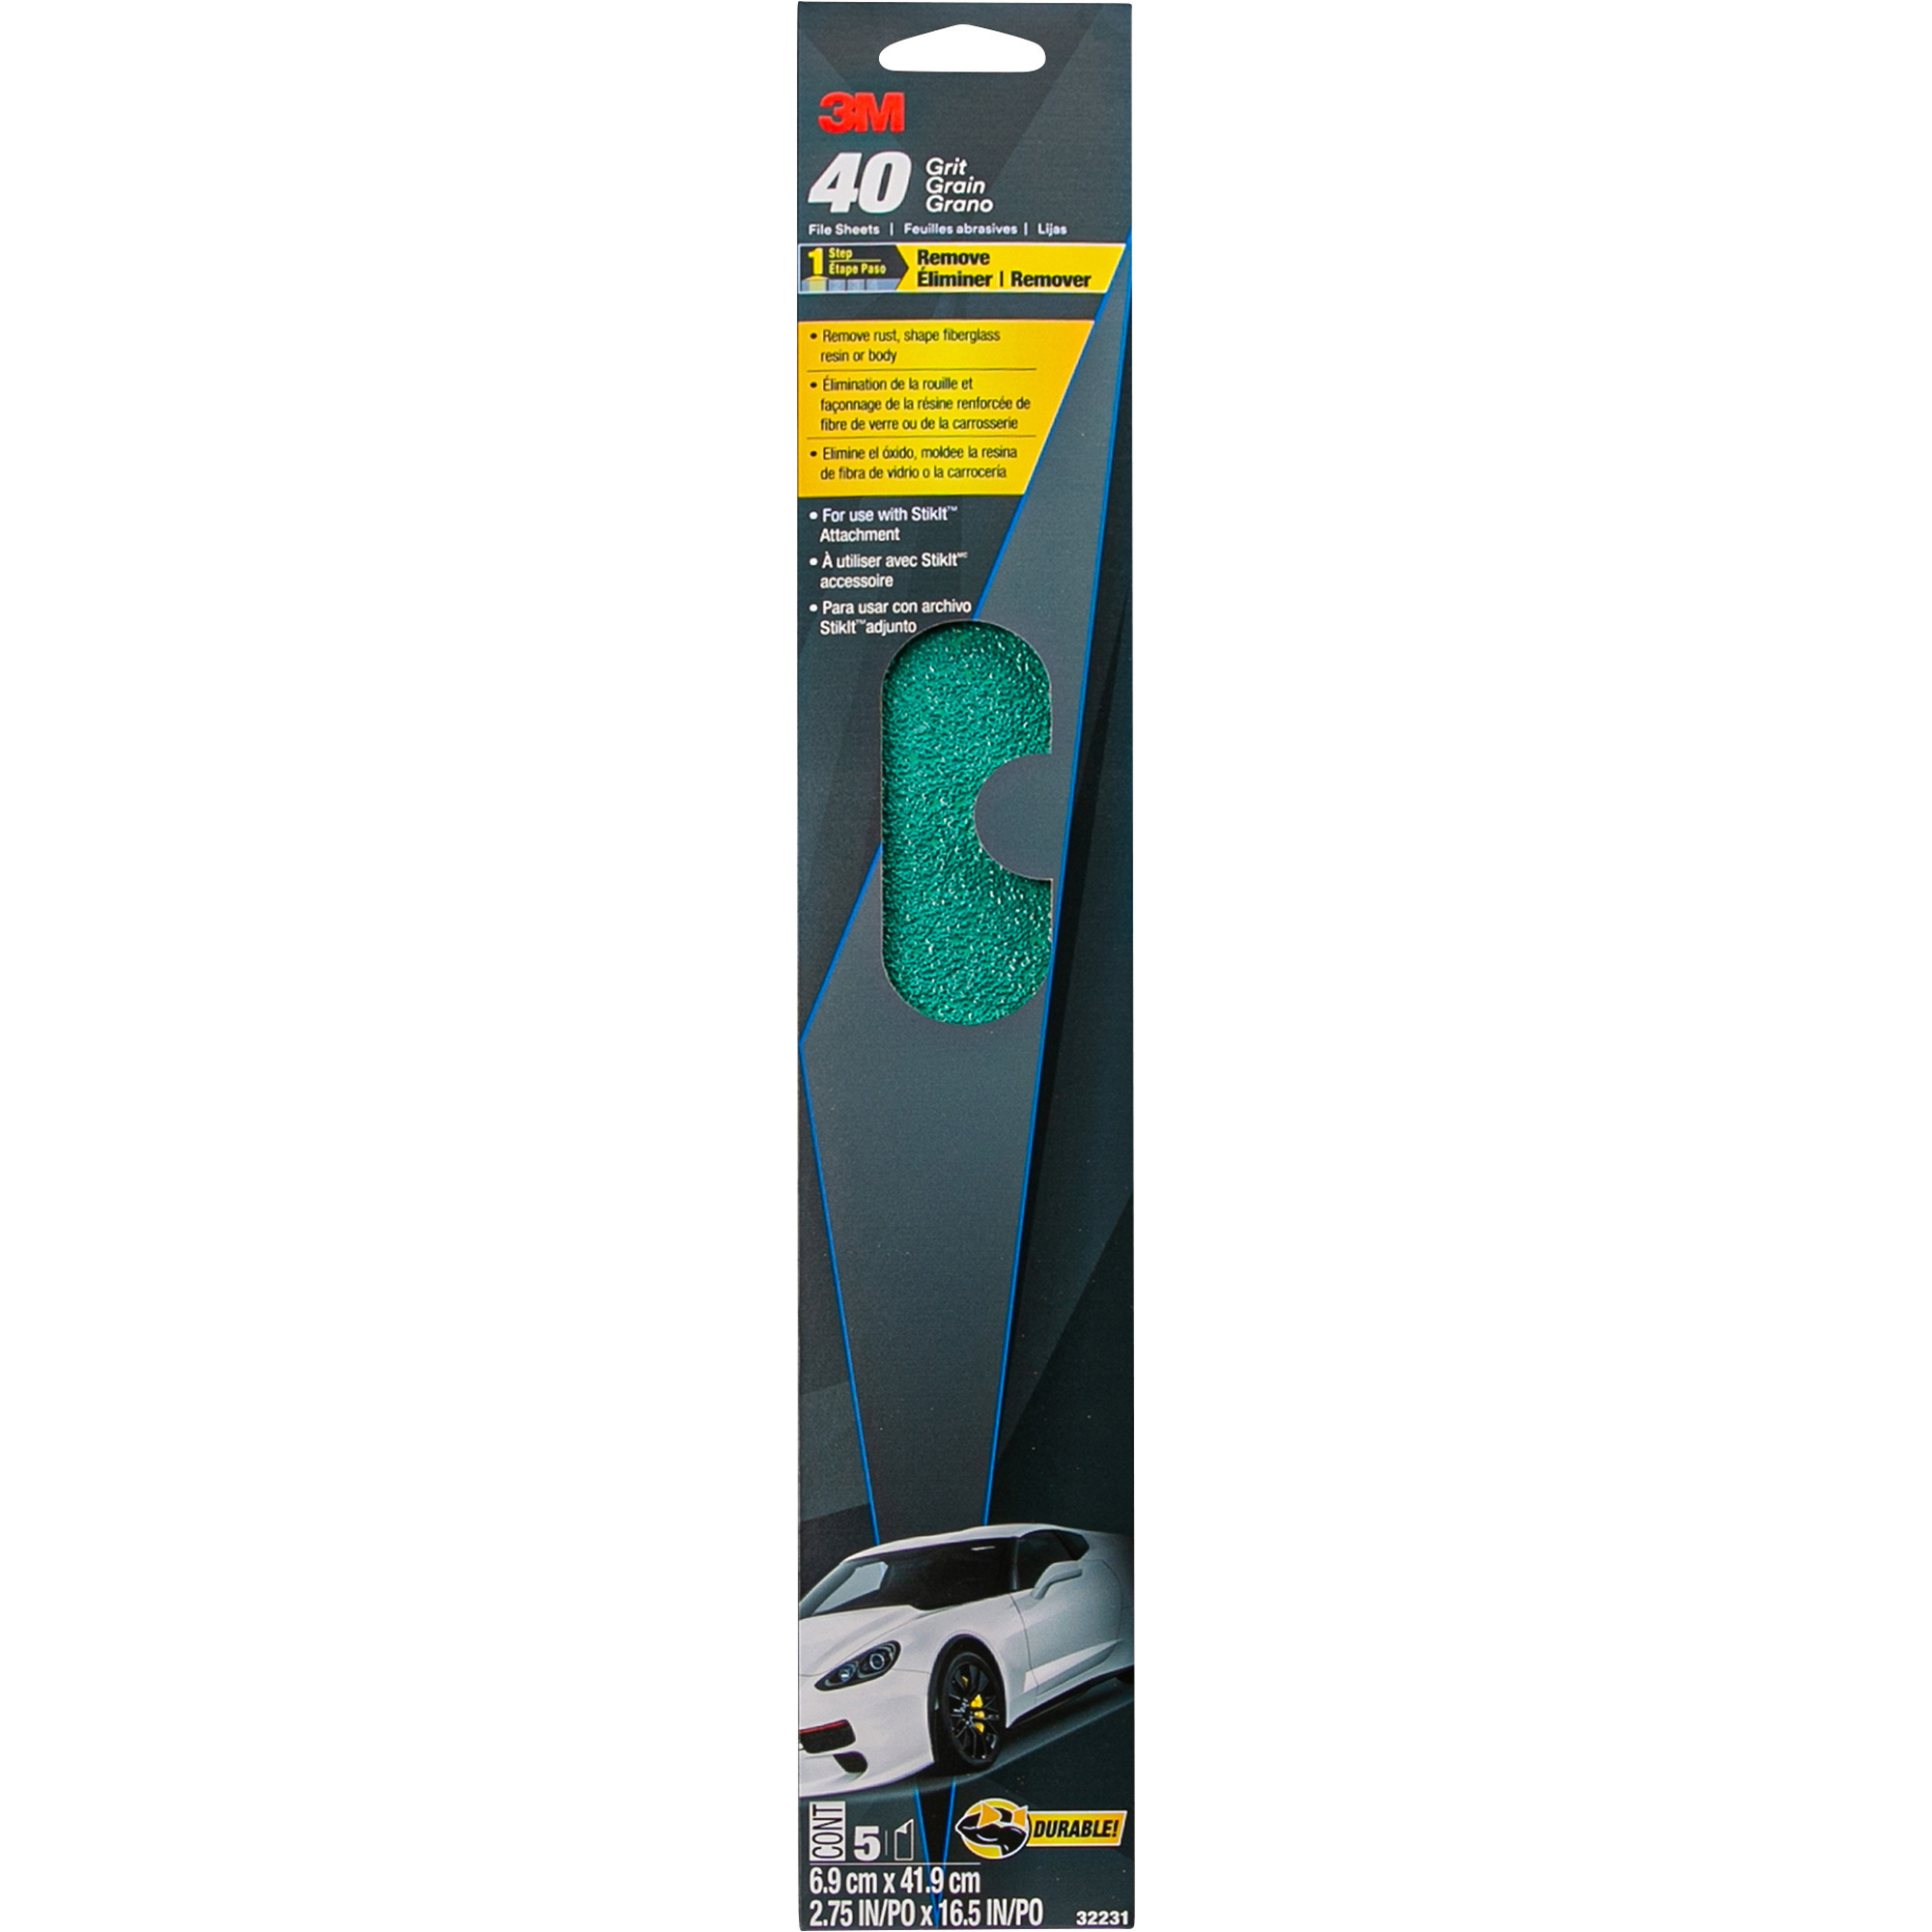 3M Green Corps 40-Grit Clip-On File Sheet, 5-Pack, 2.75Inch x 16.5Inch, Model 32231